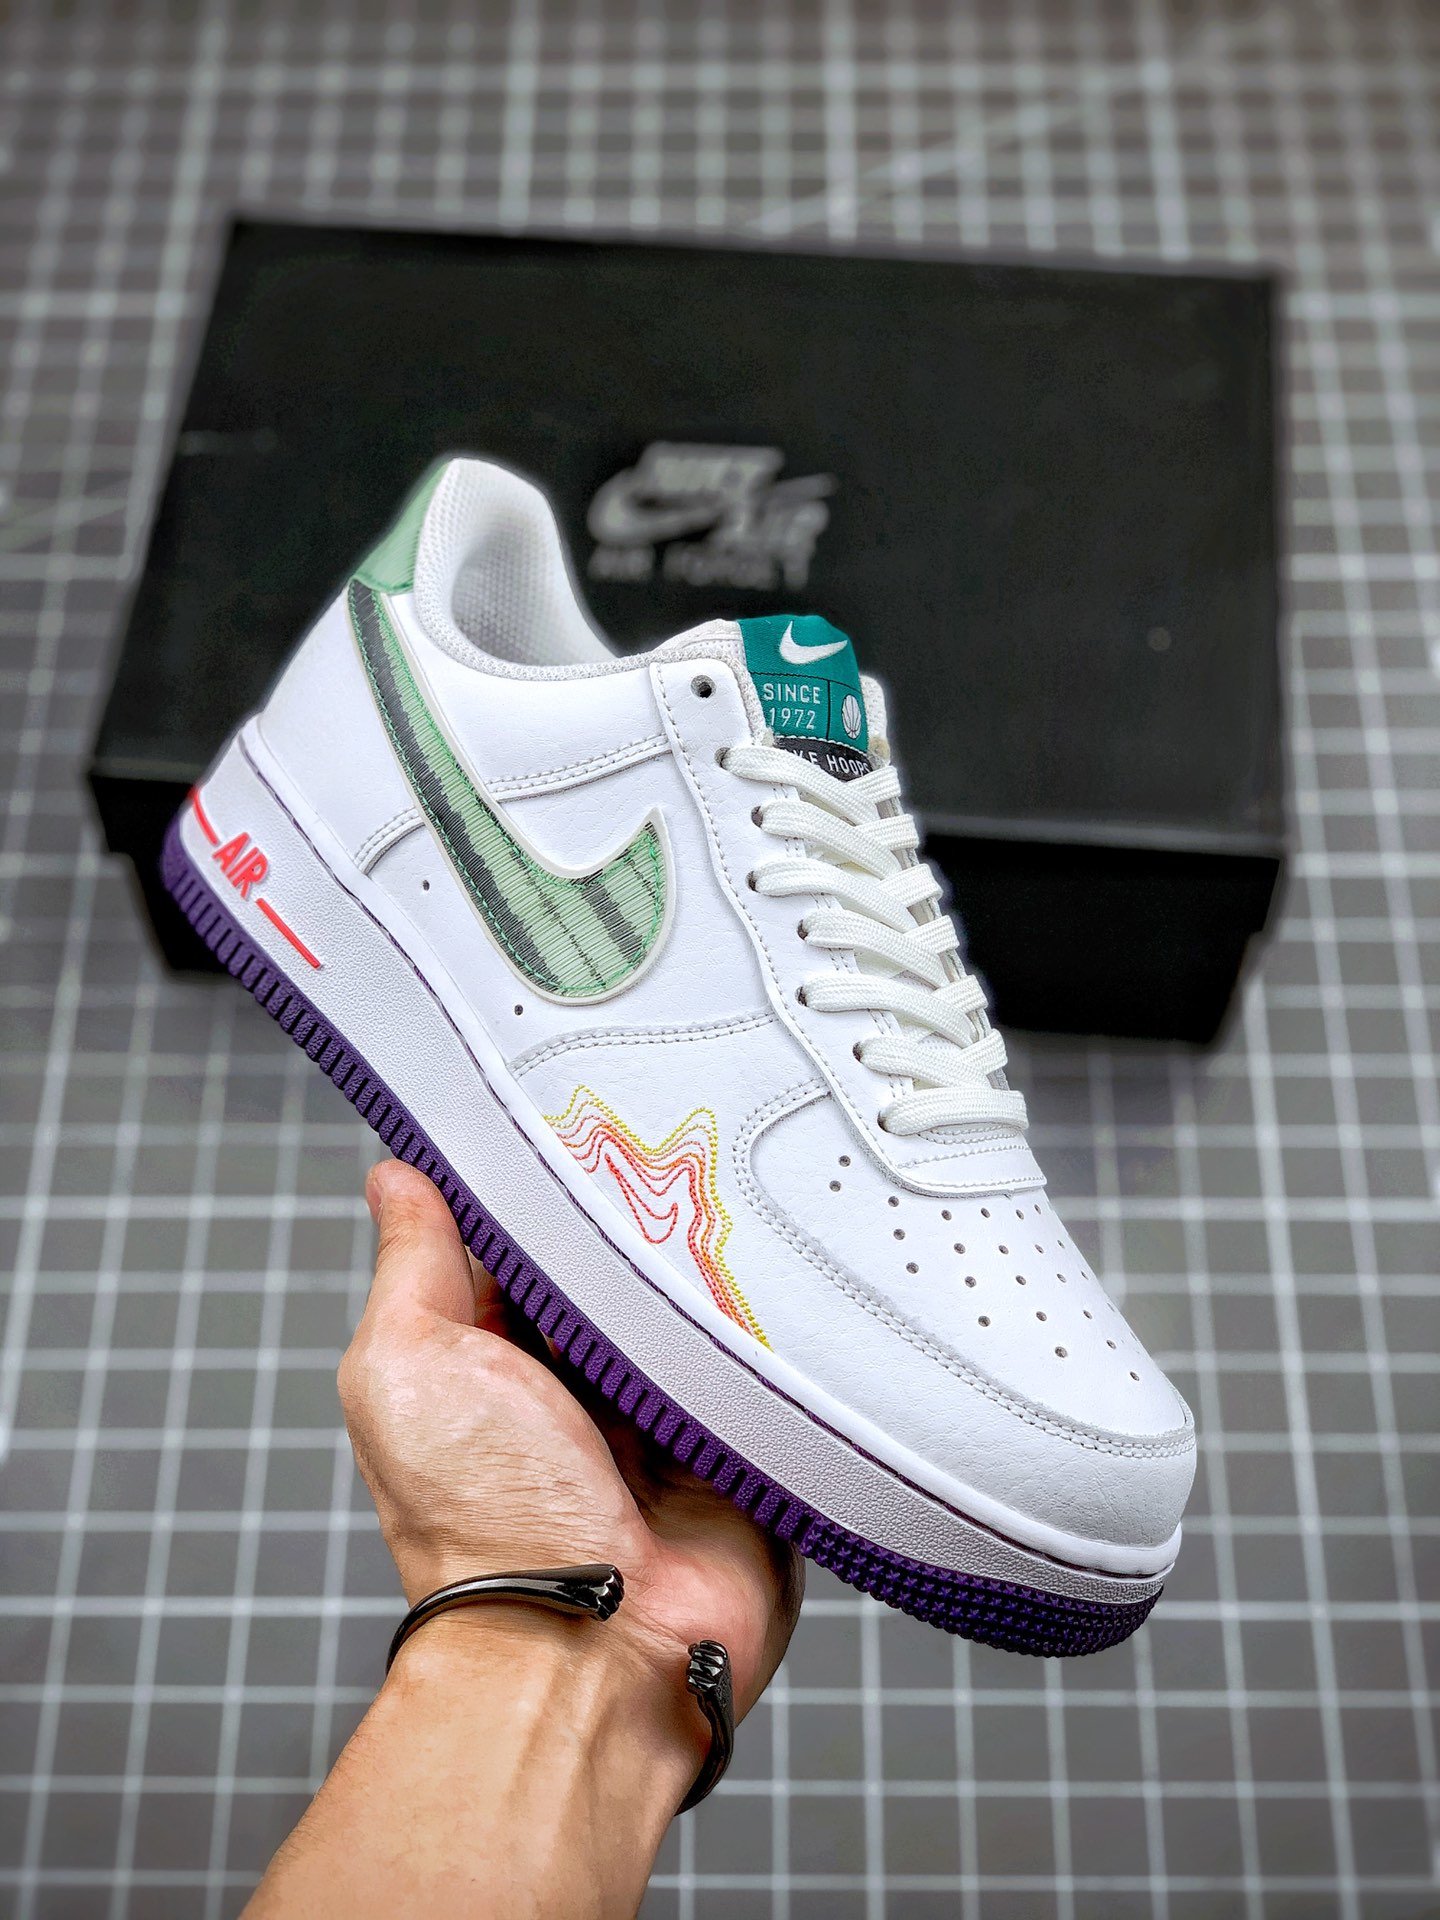 Nike Air AF Force 1 "Music" White/Red CW6015-100 Shoes